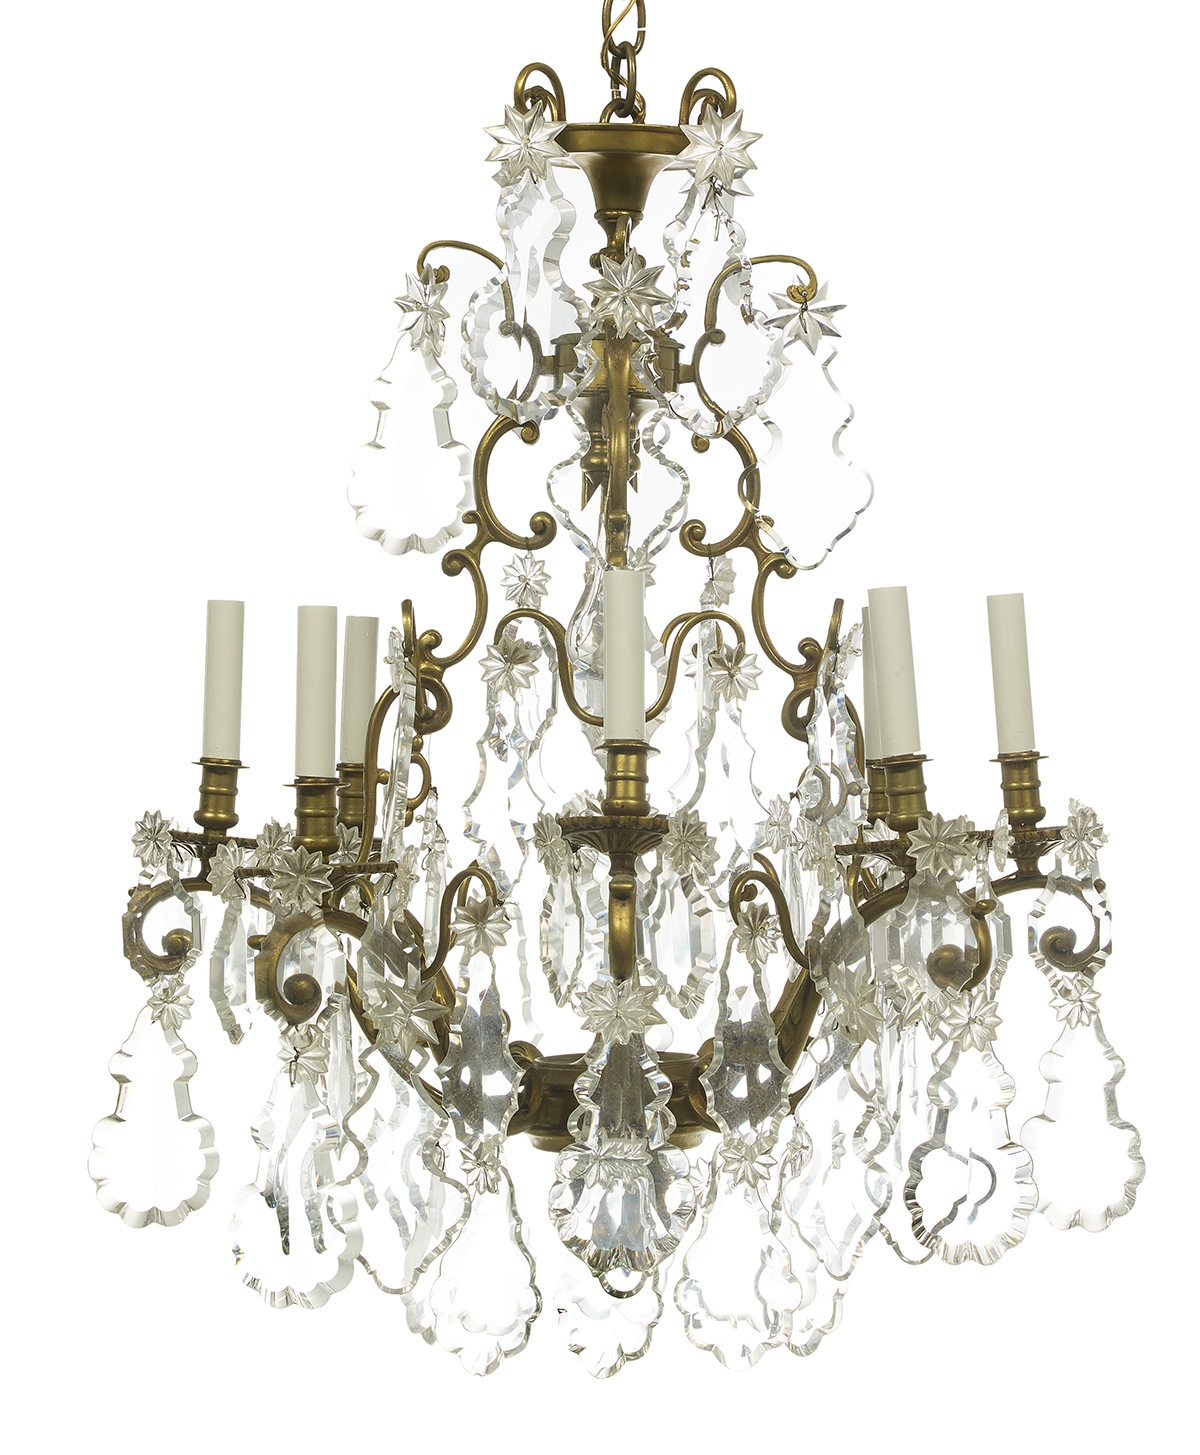 Bronze and Crystal Chandelier